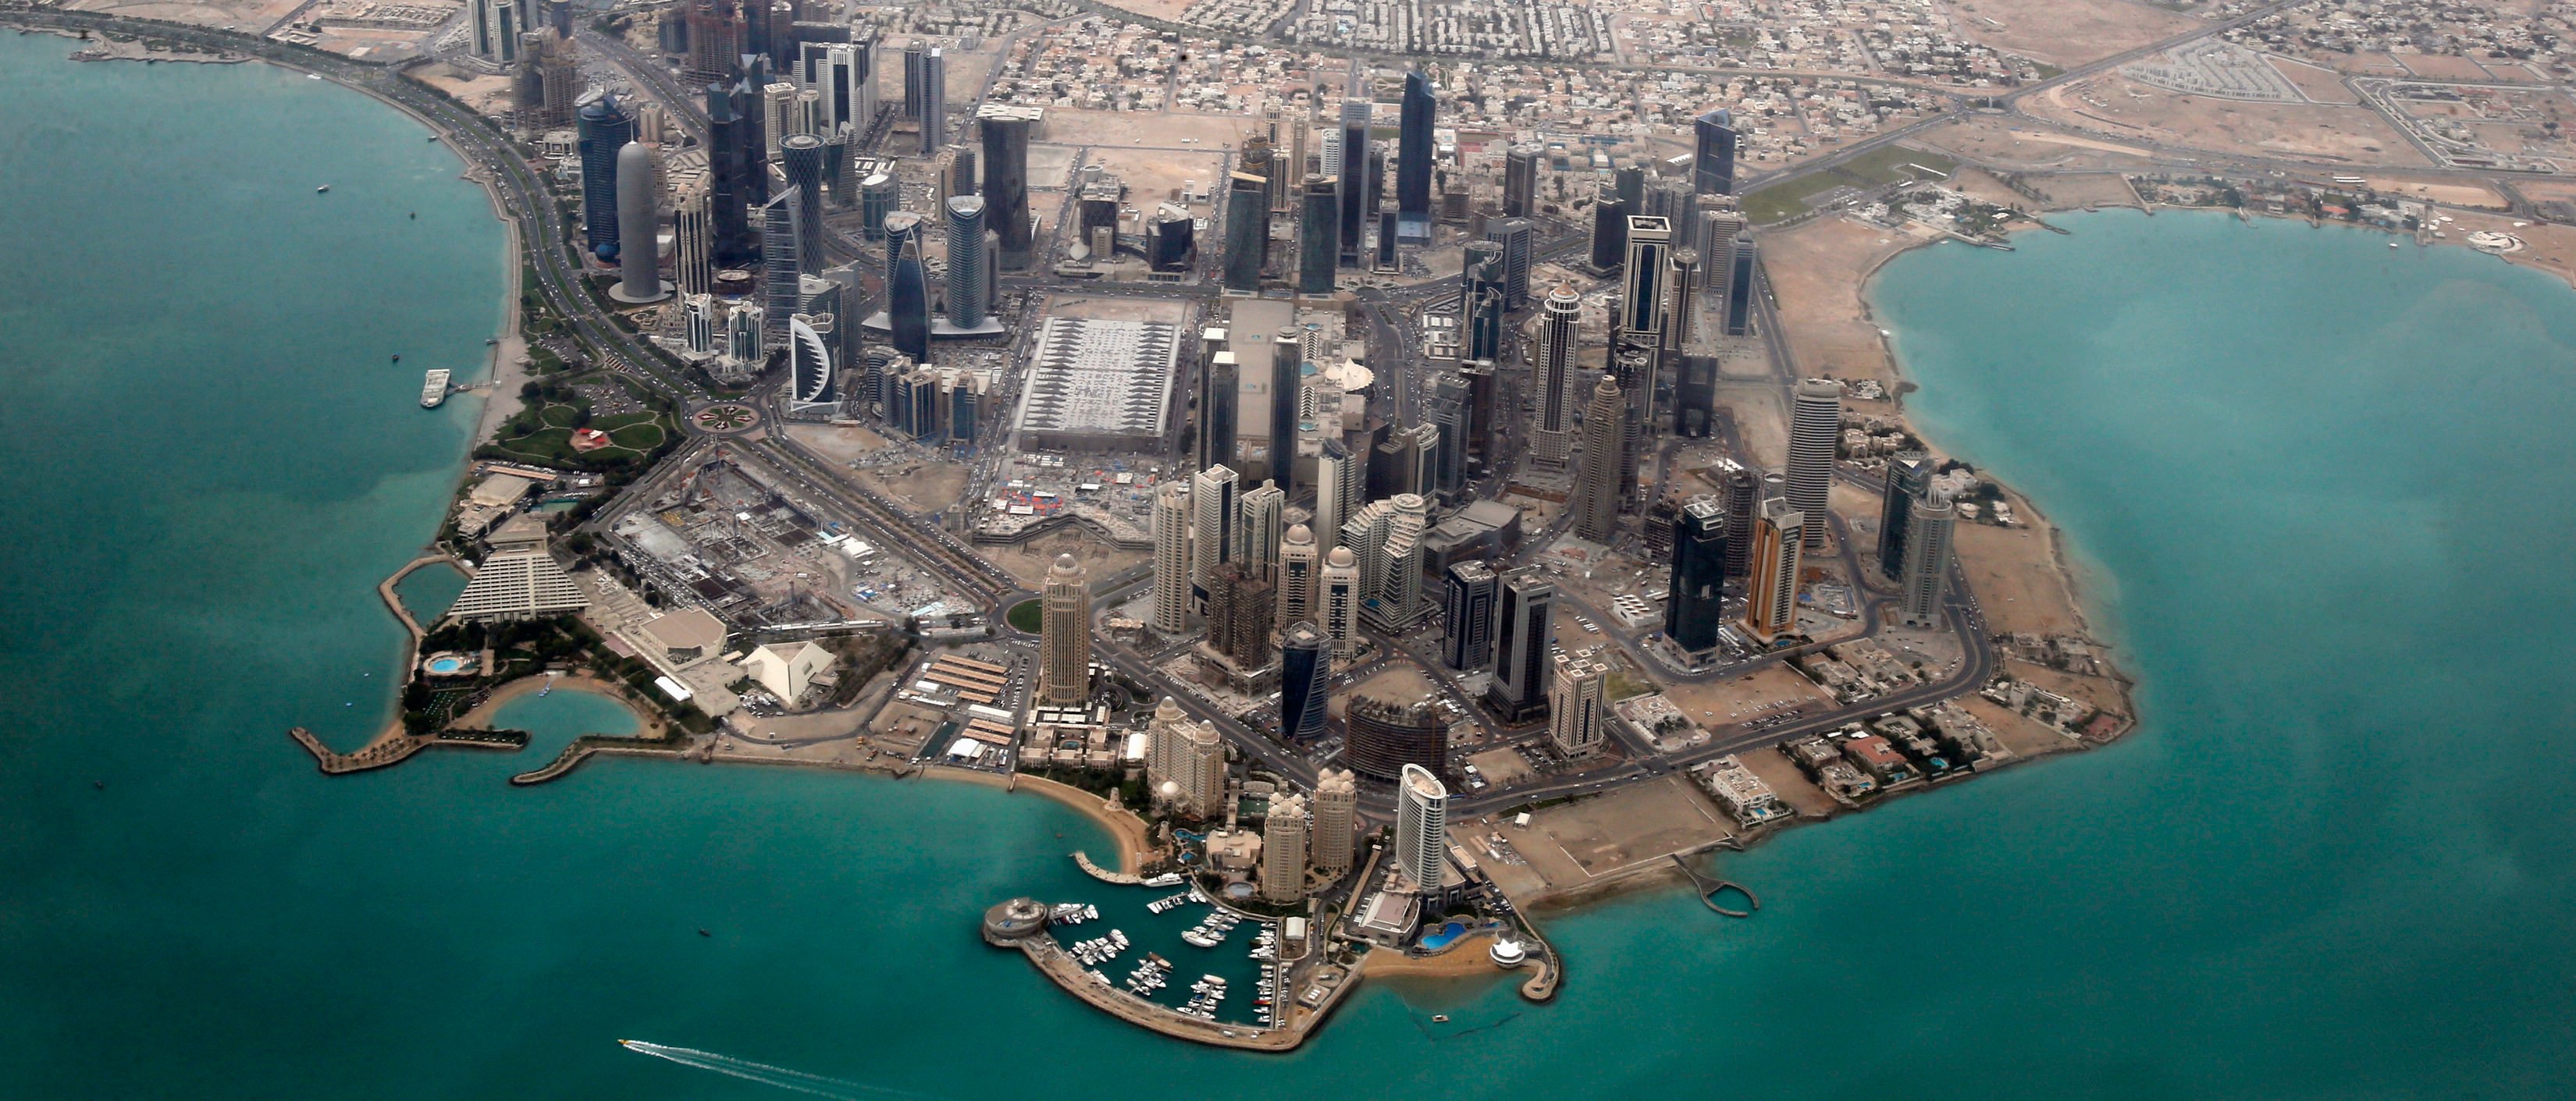 An aerial view shows Doha's diplomatic area March 21, 2013. REUTERS/Fadi Al-Assaad (QATAR - Tags: CITYSCAPE TPX IMAGES OF THE DAY) - GM1E93L1O2W01